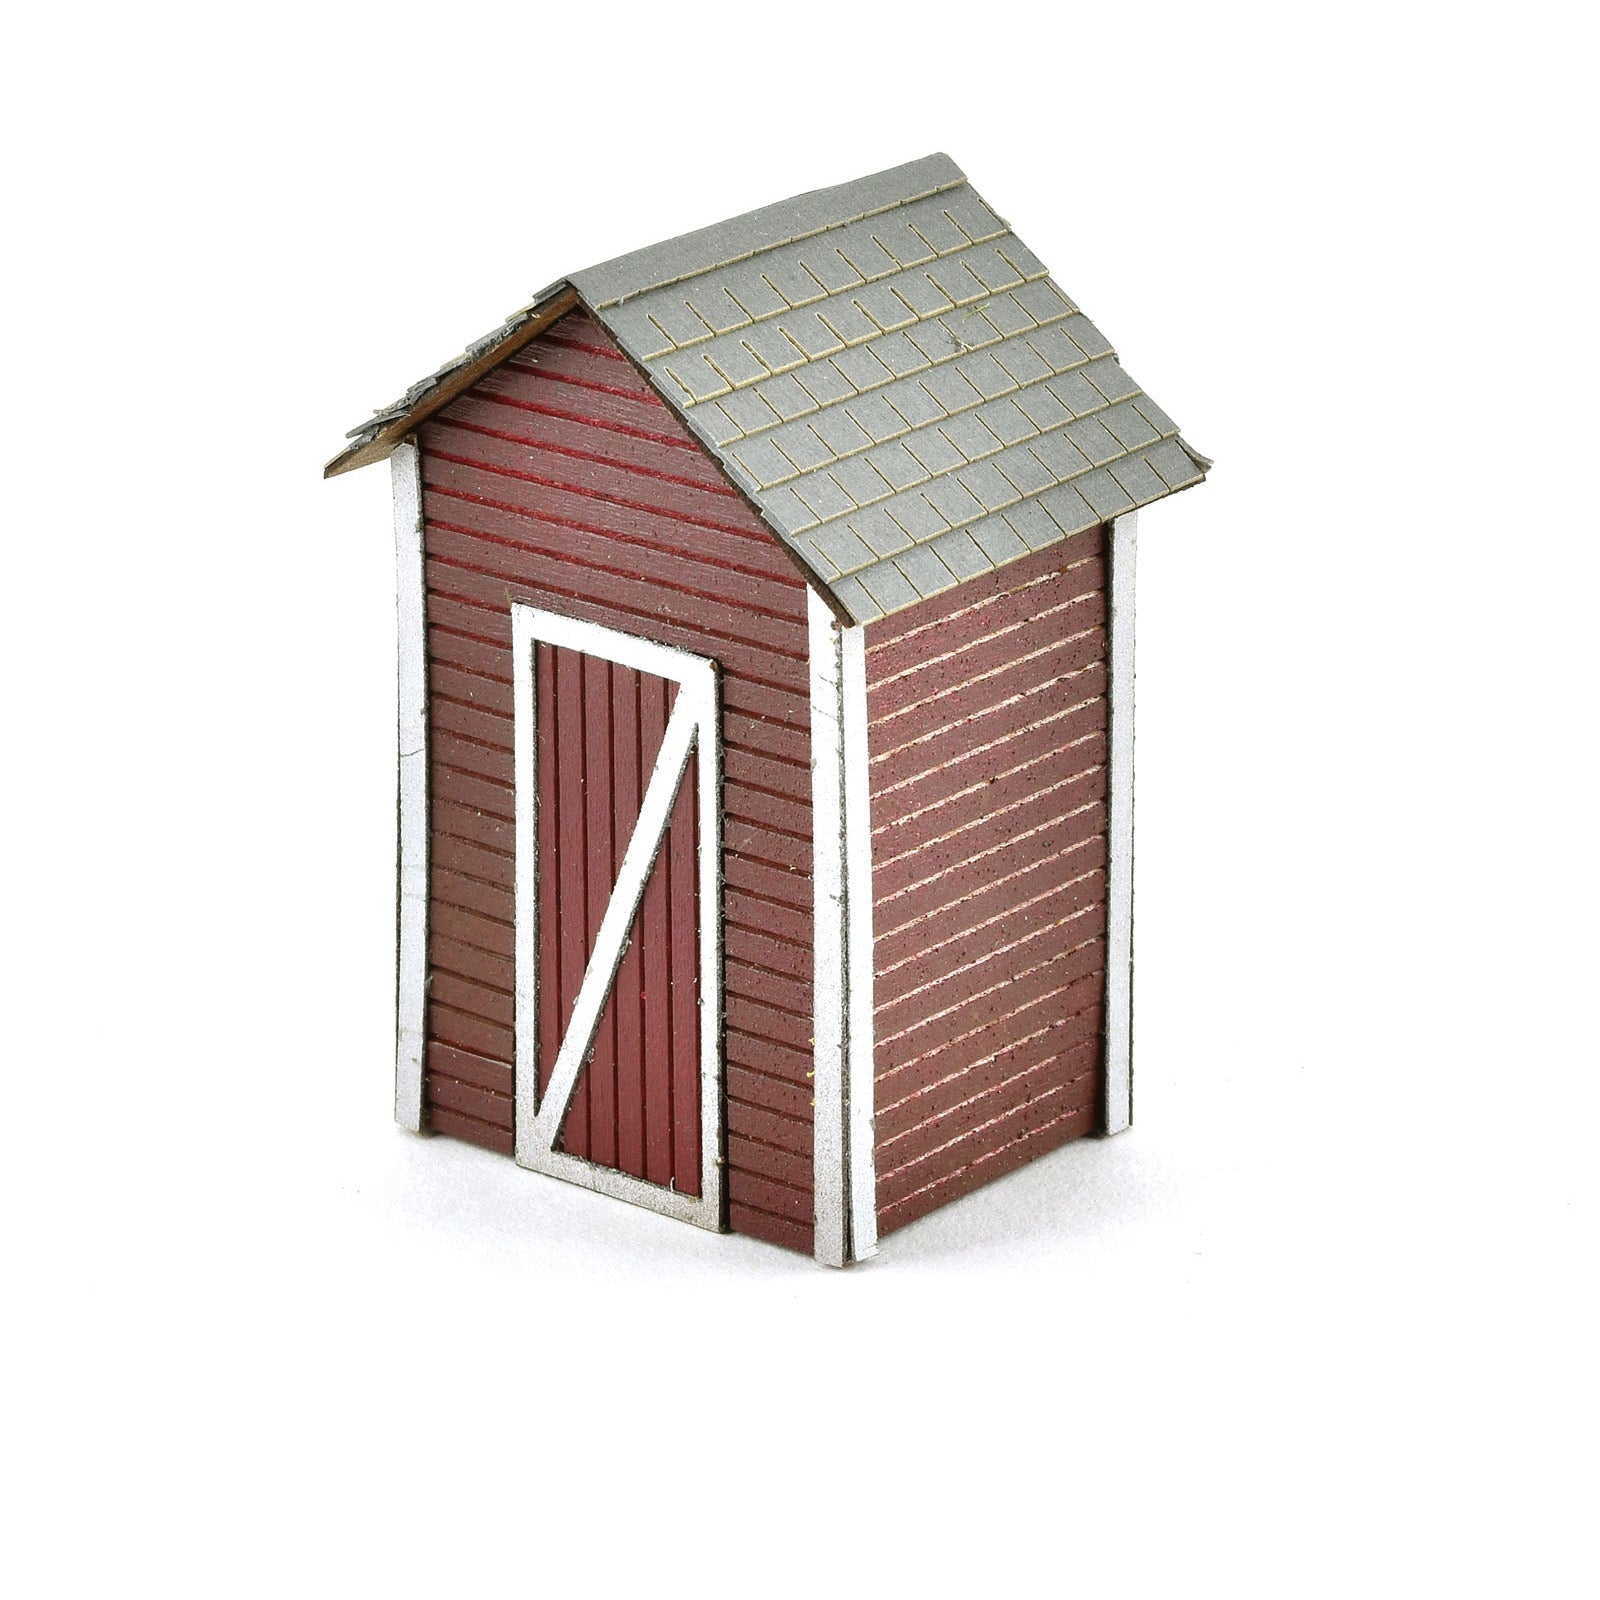 Single Occupancy Outdoor Lavatory Kit, O Scale, By Scientific